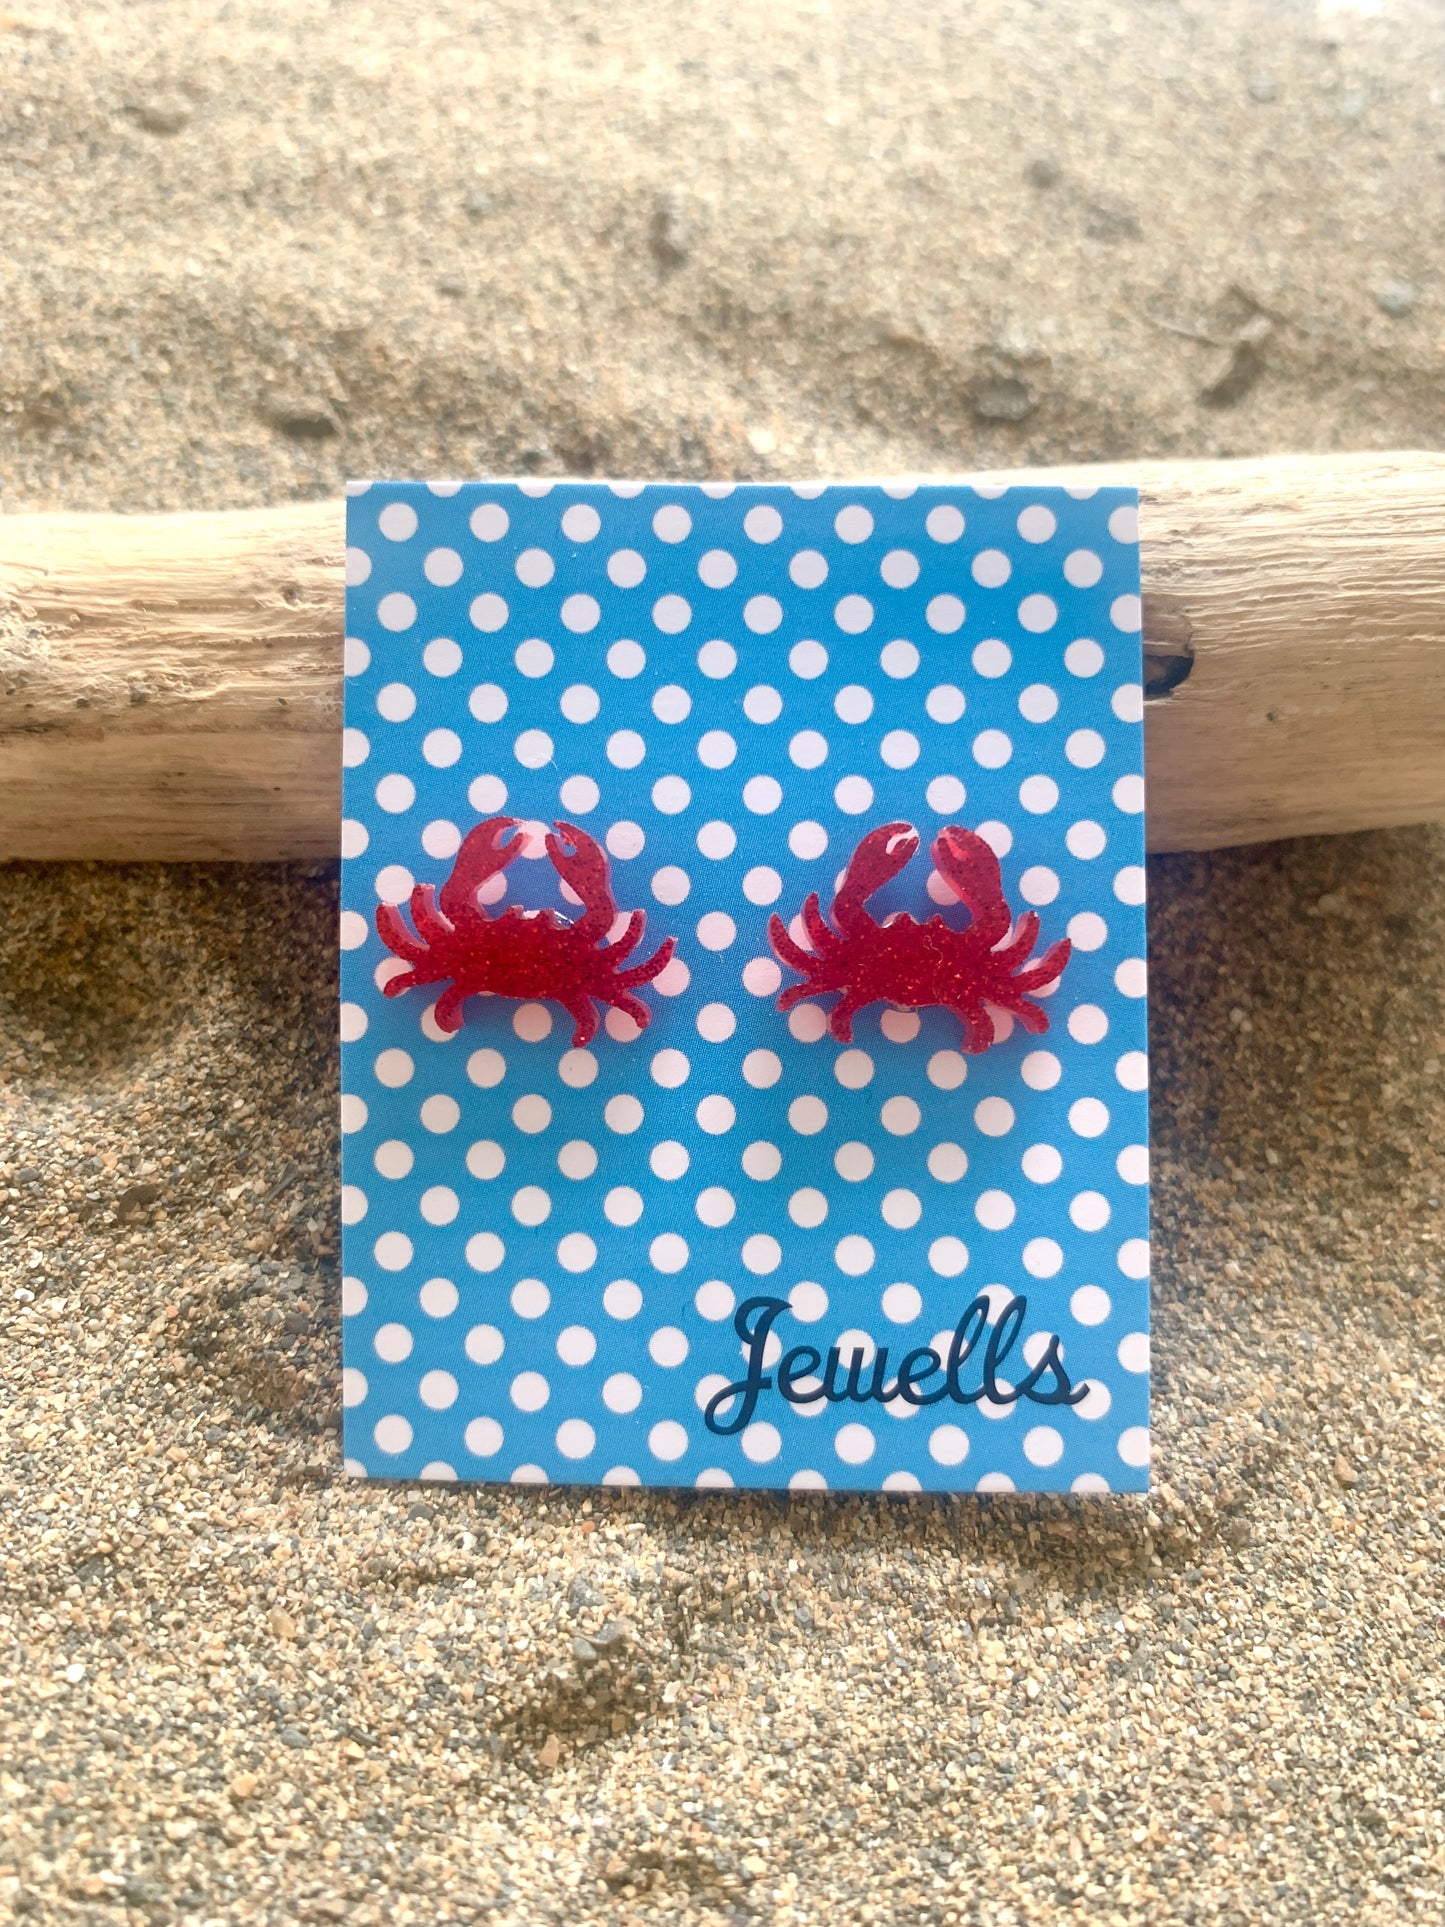 Sparkly Sea Creature Stud Earrings: Lobster, Crab or Whale